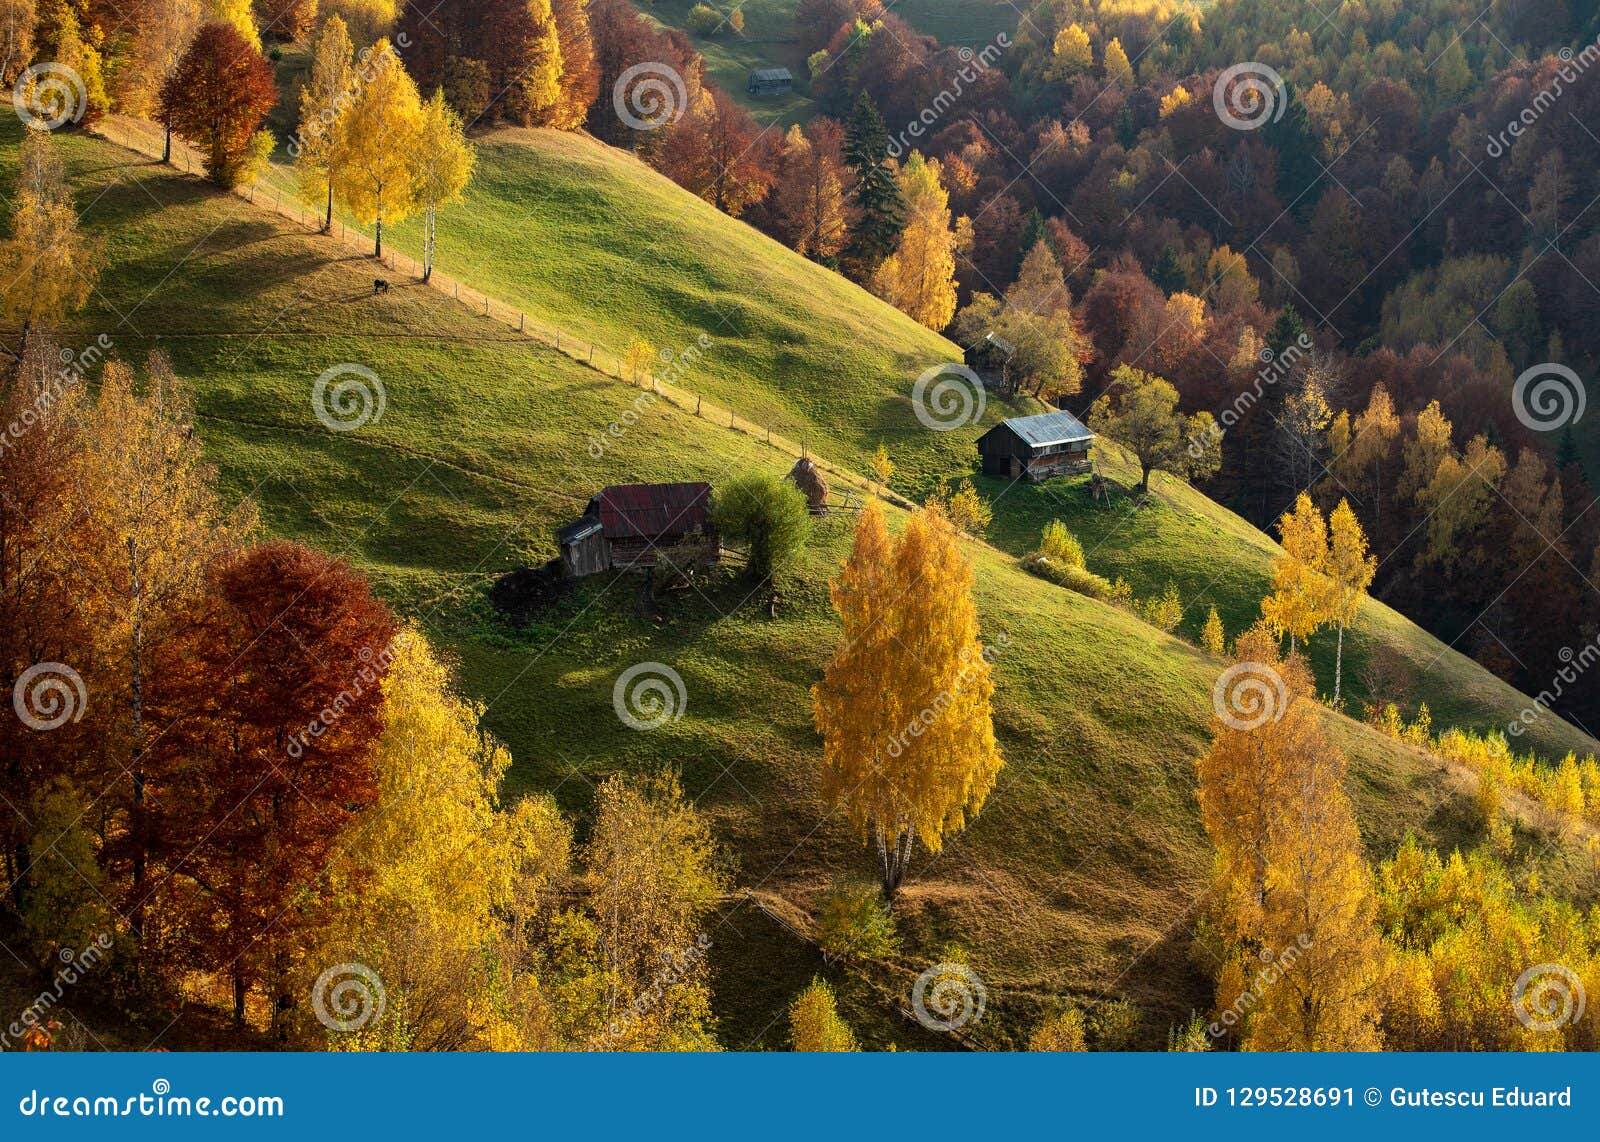 Transylvania Time , Romania Country Side Stock Image - Image of masiff, side: 129528691